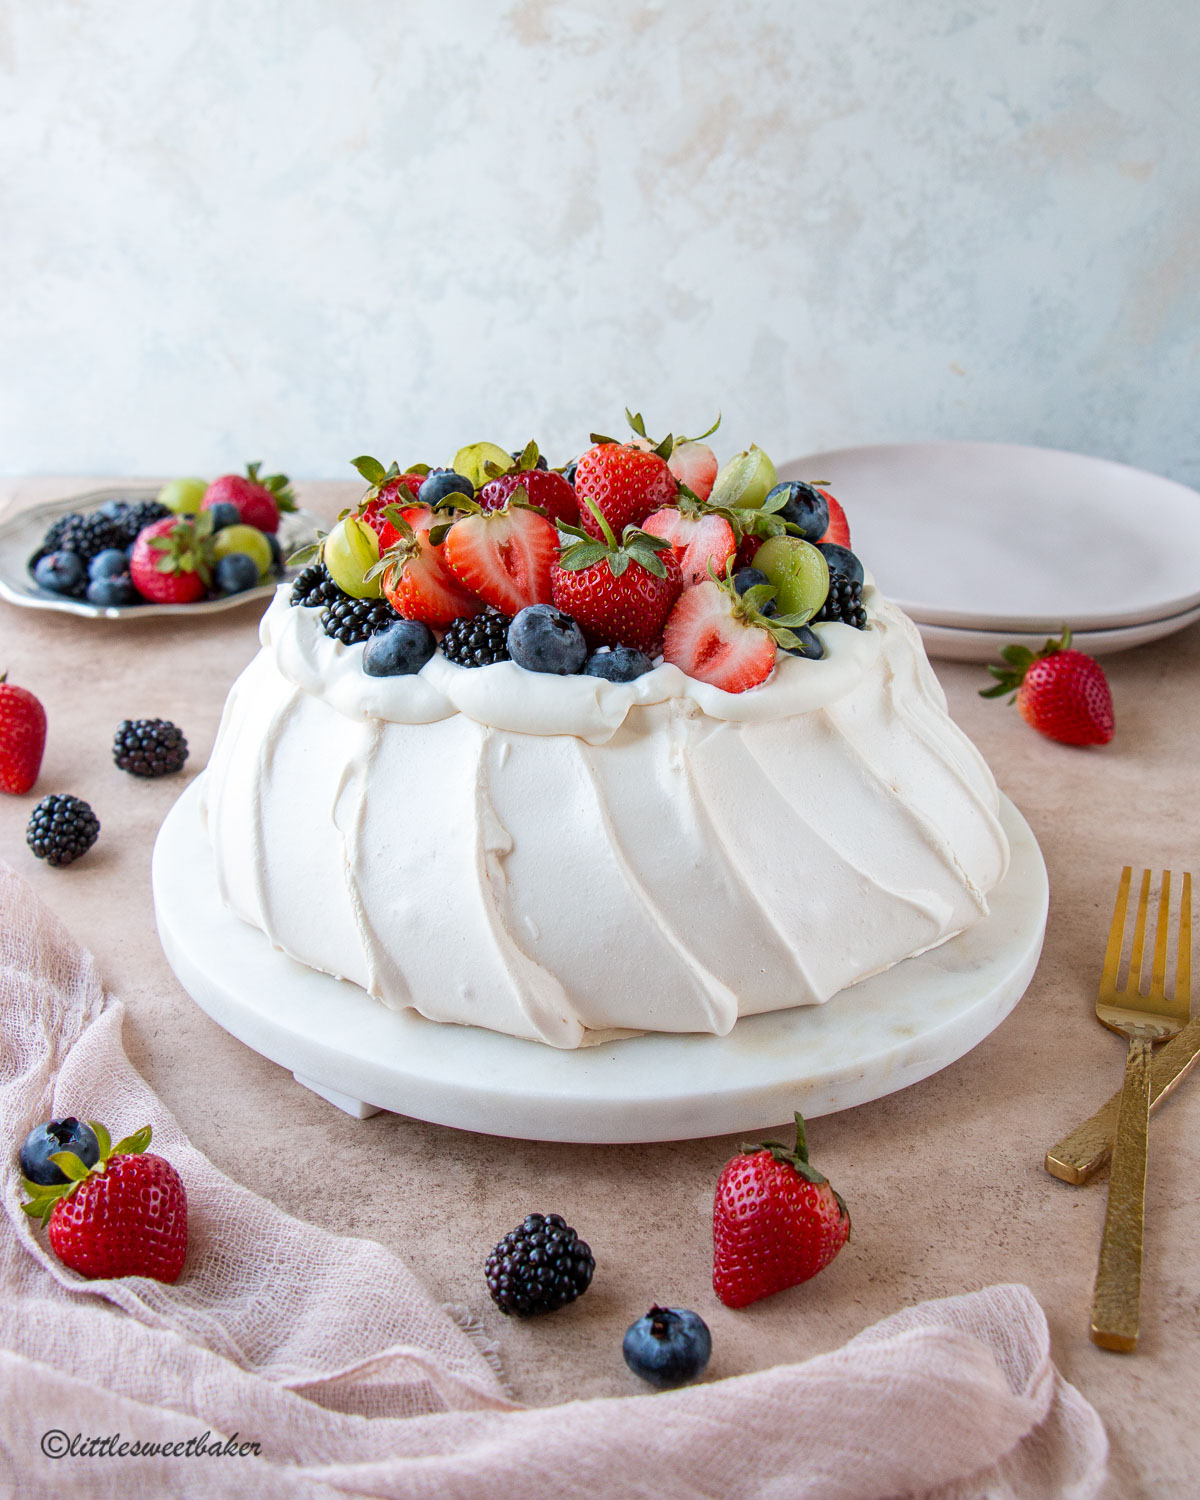 An easy pavlova topped with whipped cream and fruits on a marble serving plate.